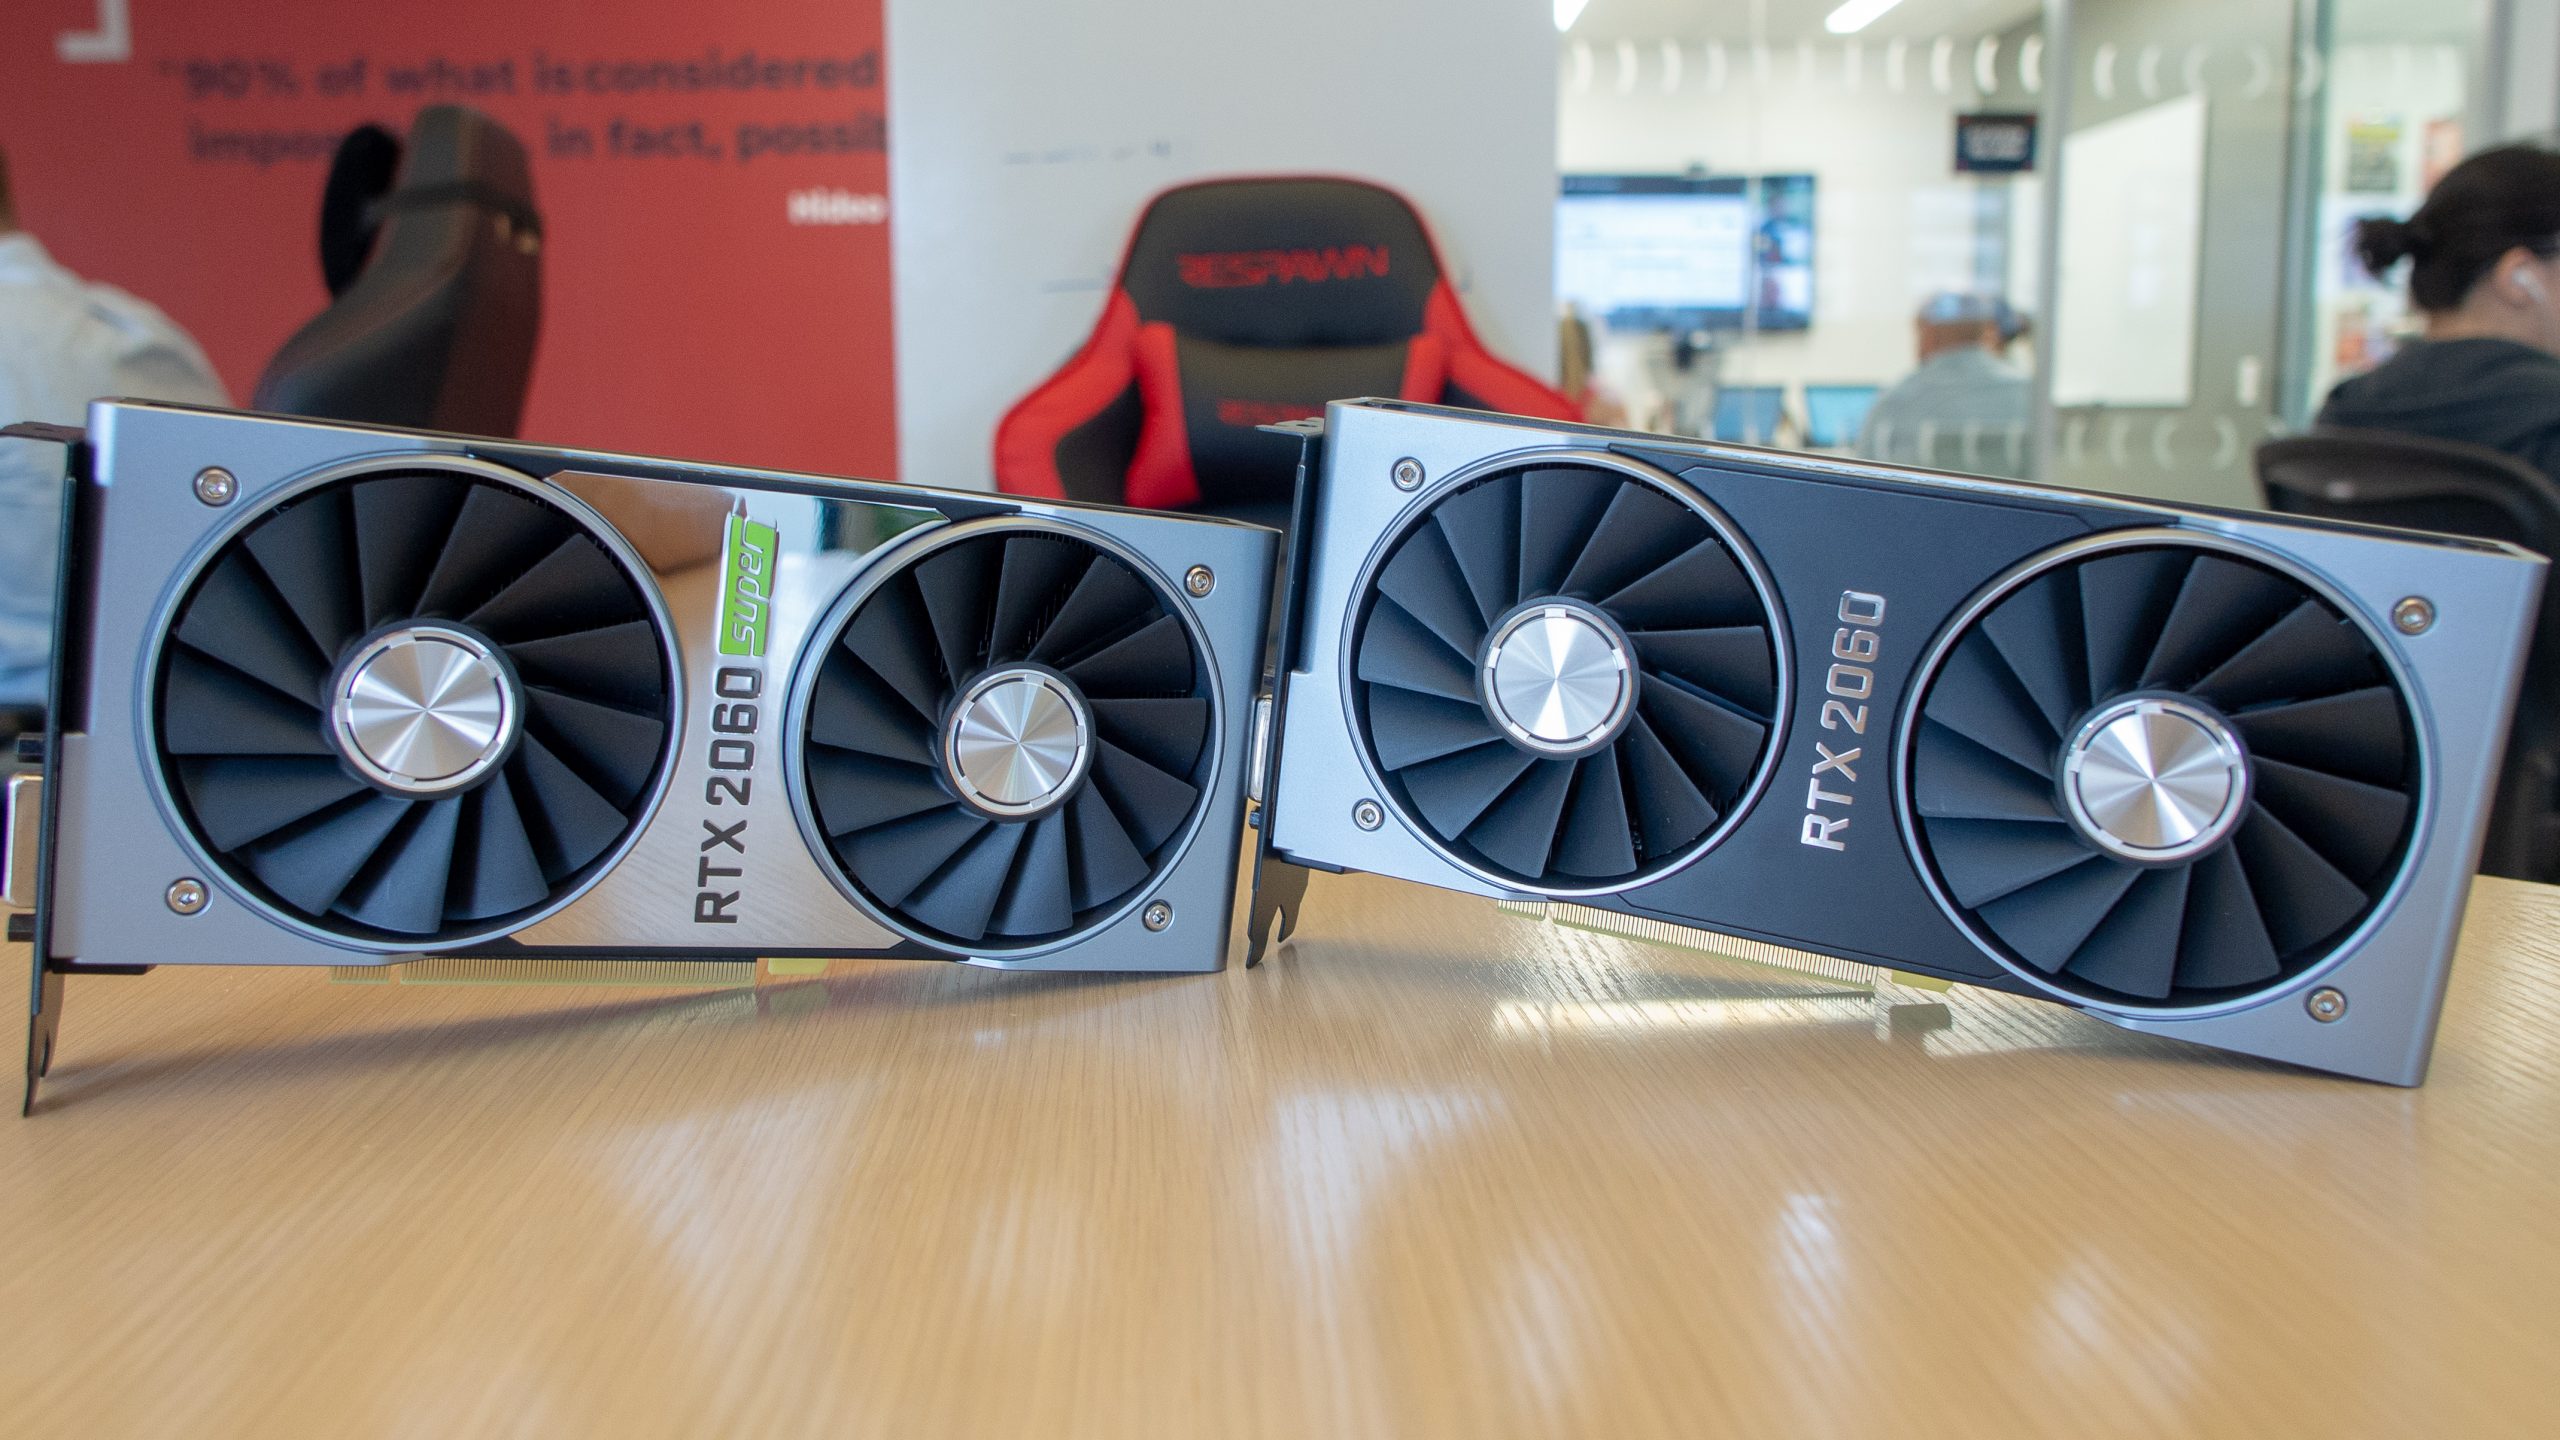 Best 1080p Graphics Cards 2021: The Best Gpus For 1080p Gaming